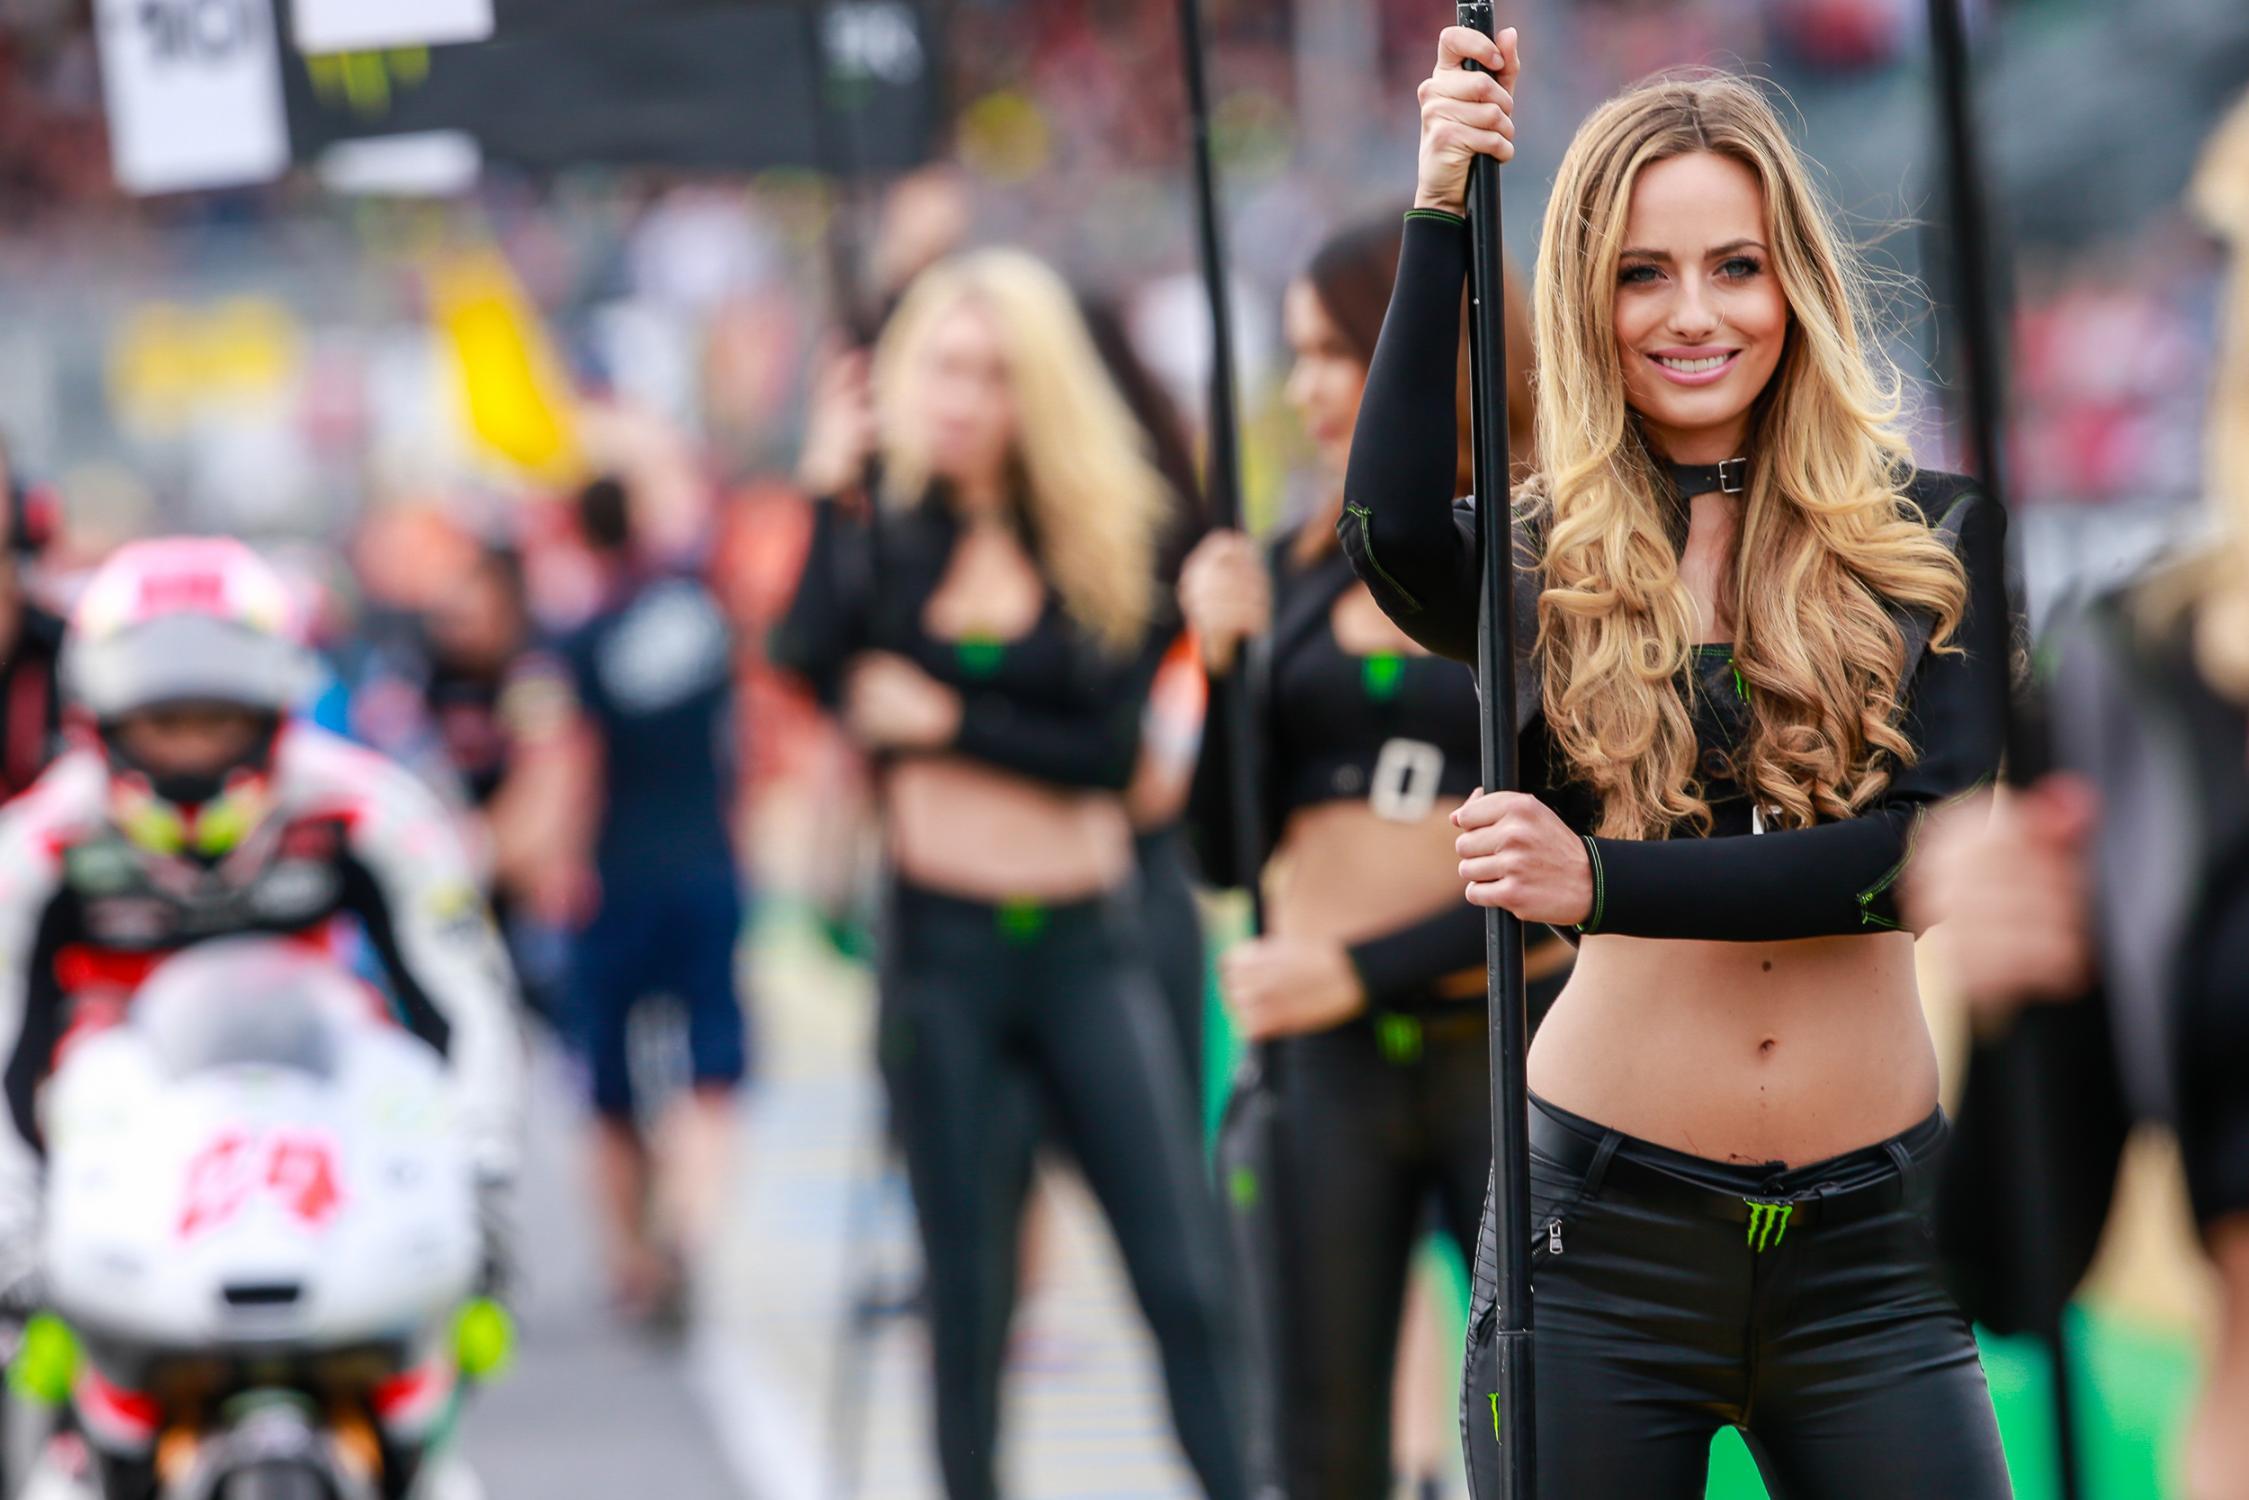 Fine collection of Paddock Girls to race your motor